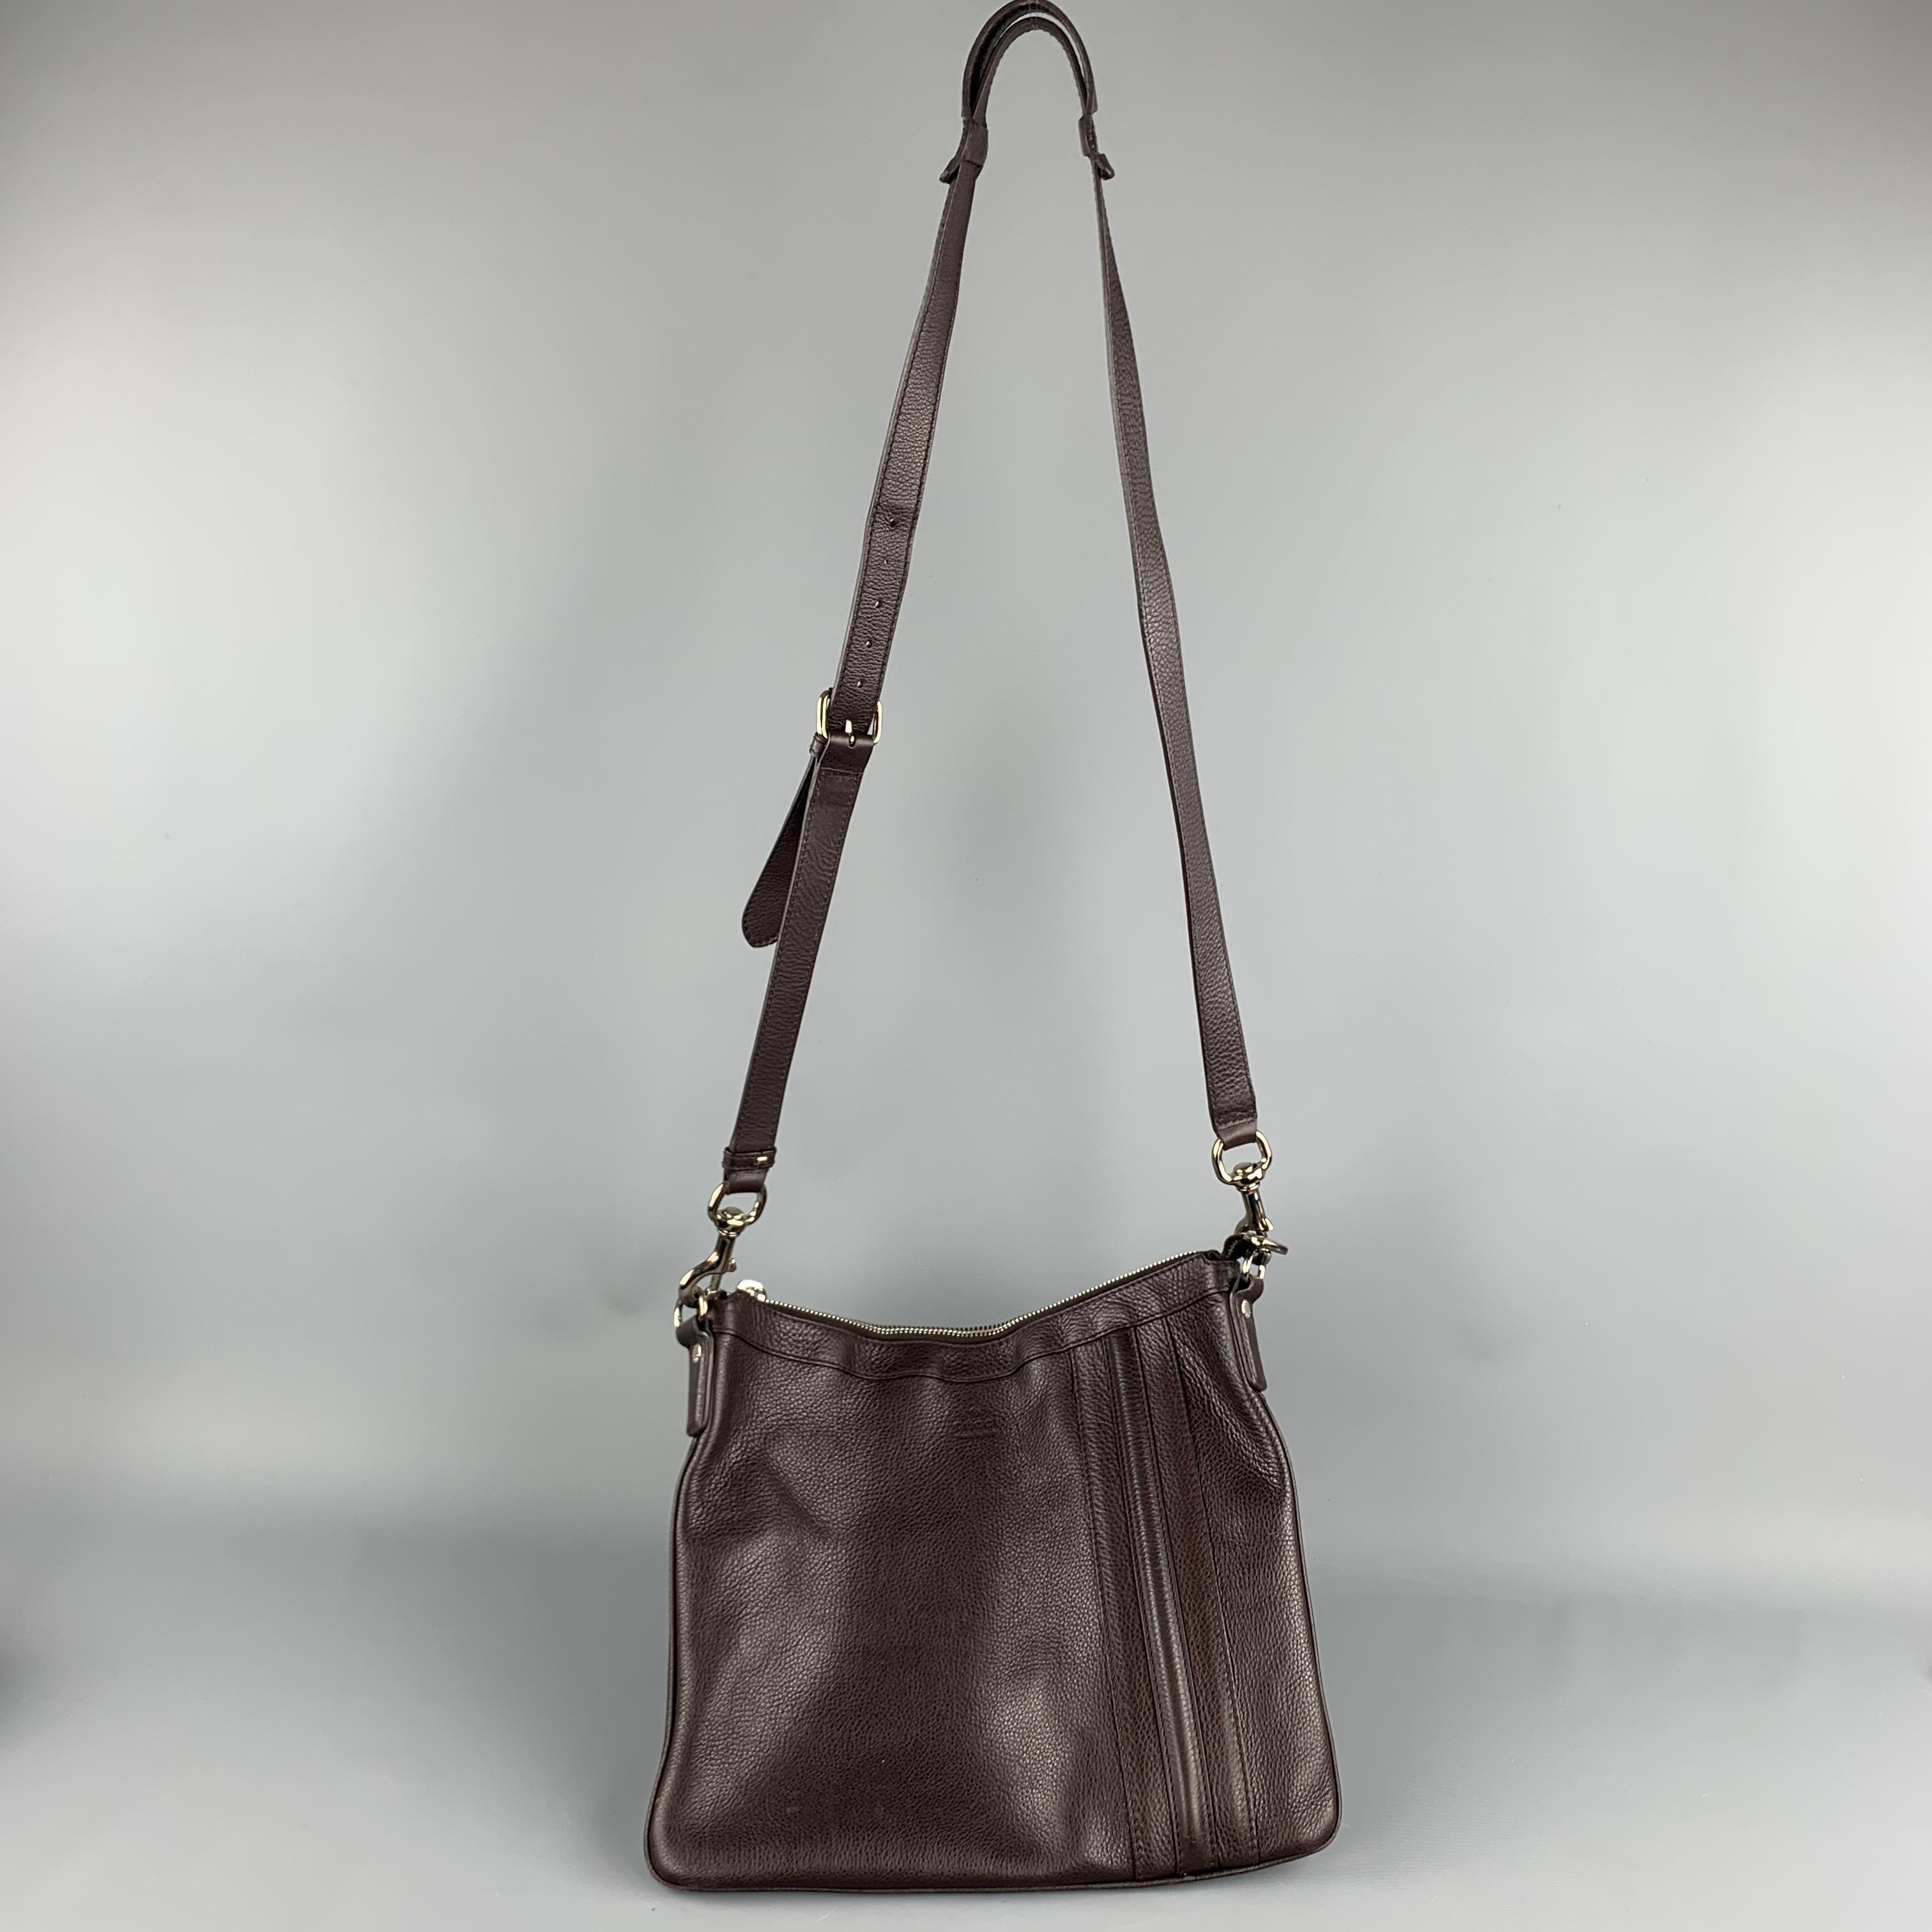 GUCCI crossbody bag comes in a textured chocolate brown leather with a logo stamped front pouch detailed with stripes and detachable strap. As is. Made in Italy.

Very Good Pre-Owned Condition.

Measurements:

Length: 13.5 in.
Width: 1 in.
Height: